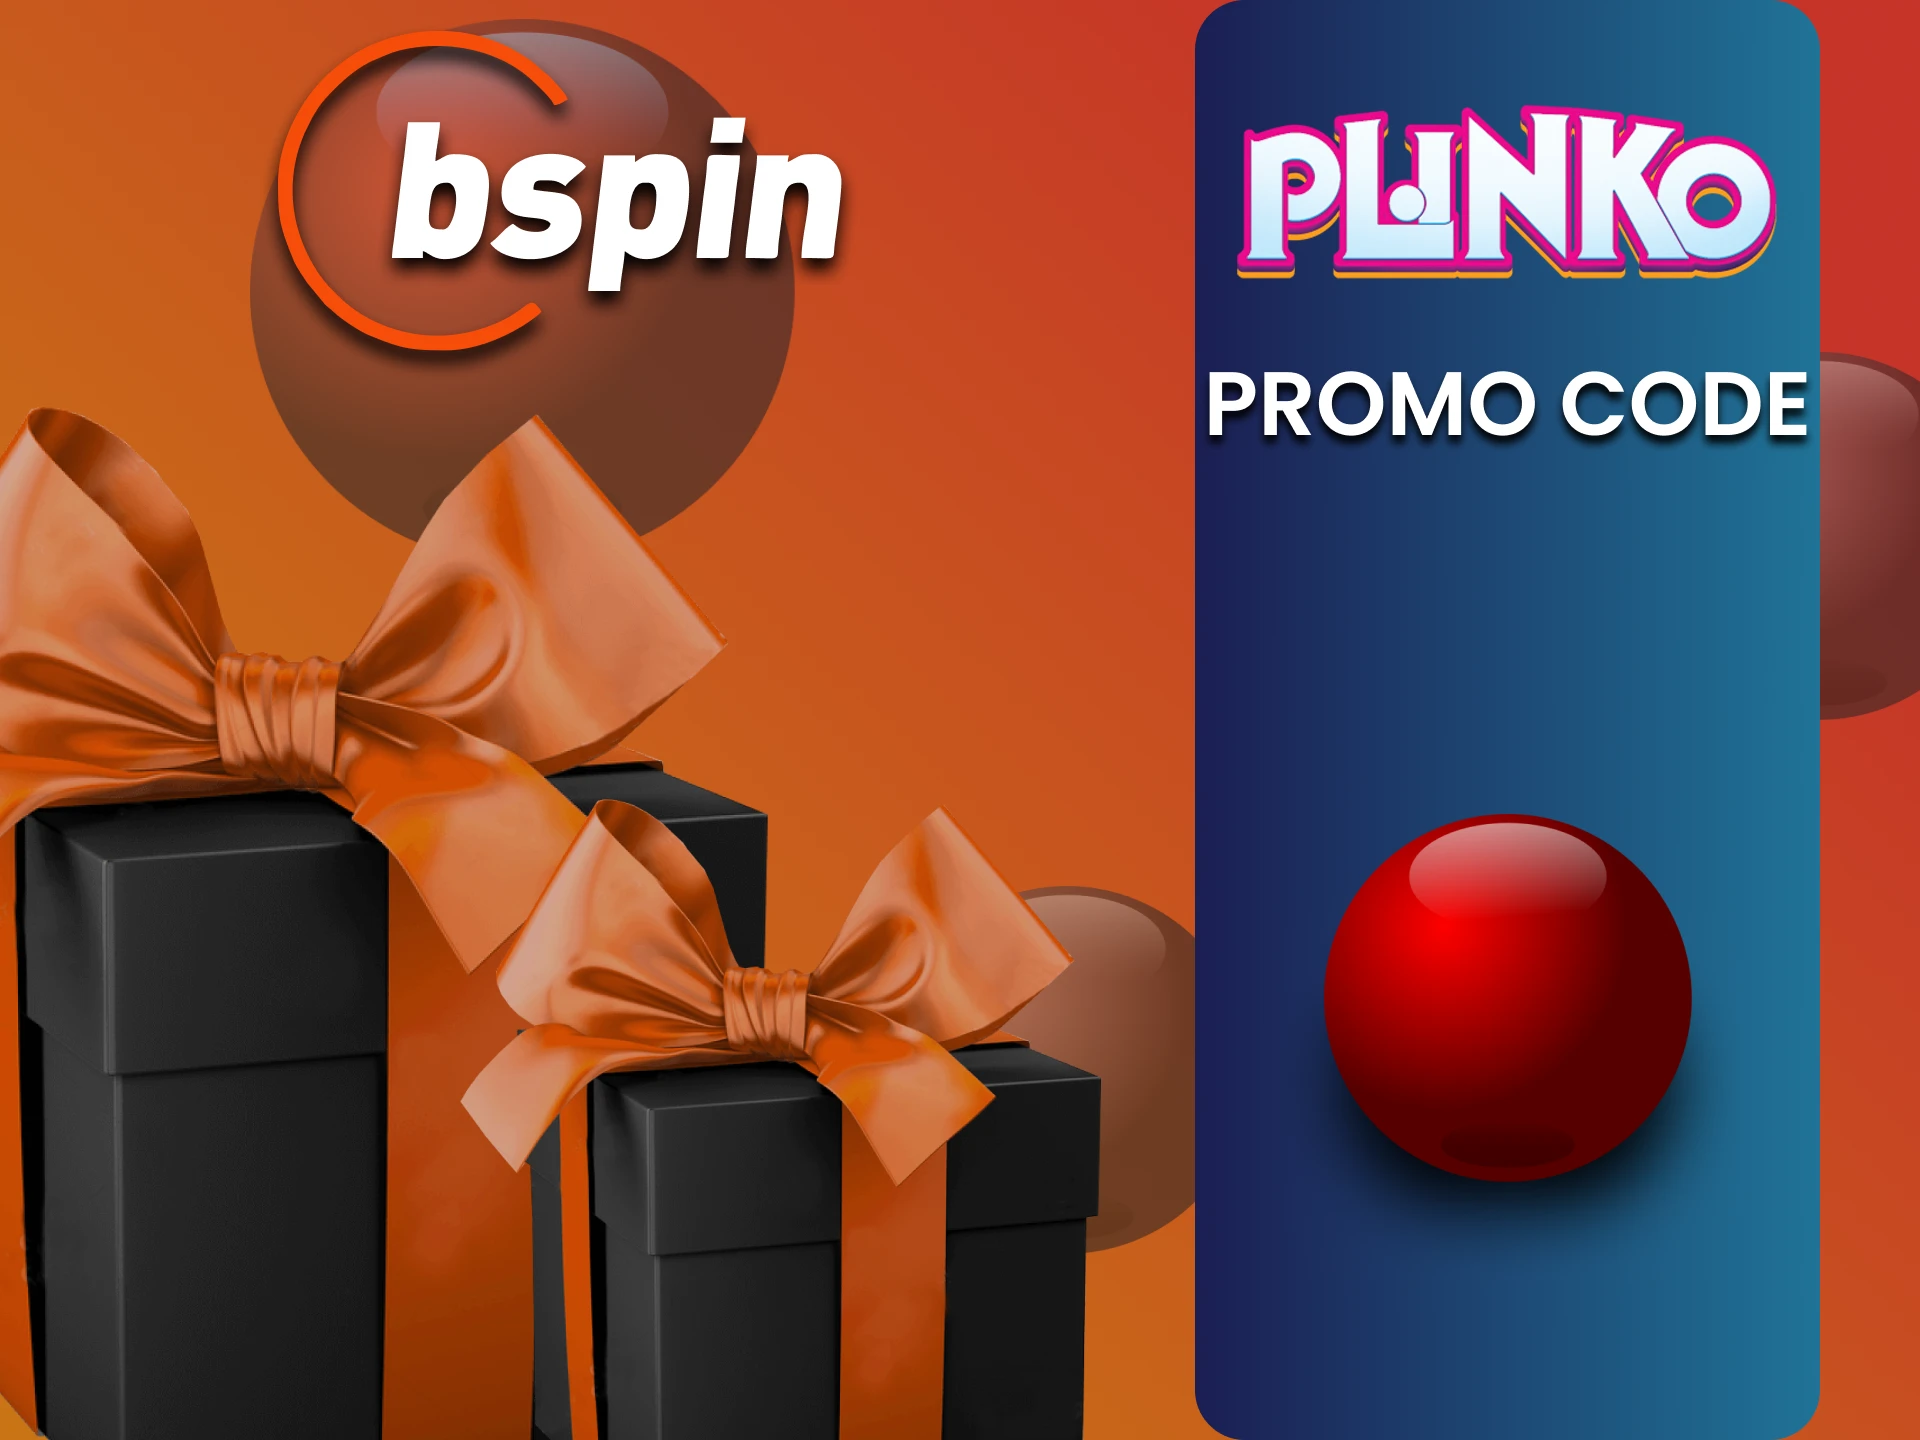 There is a promo code for the game Plinko from Bspin.